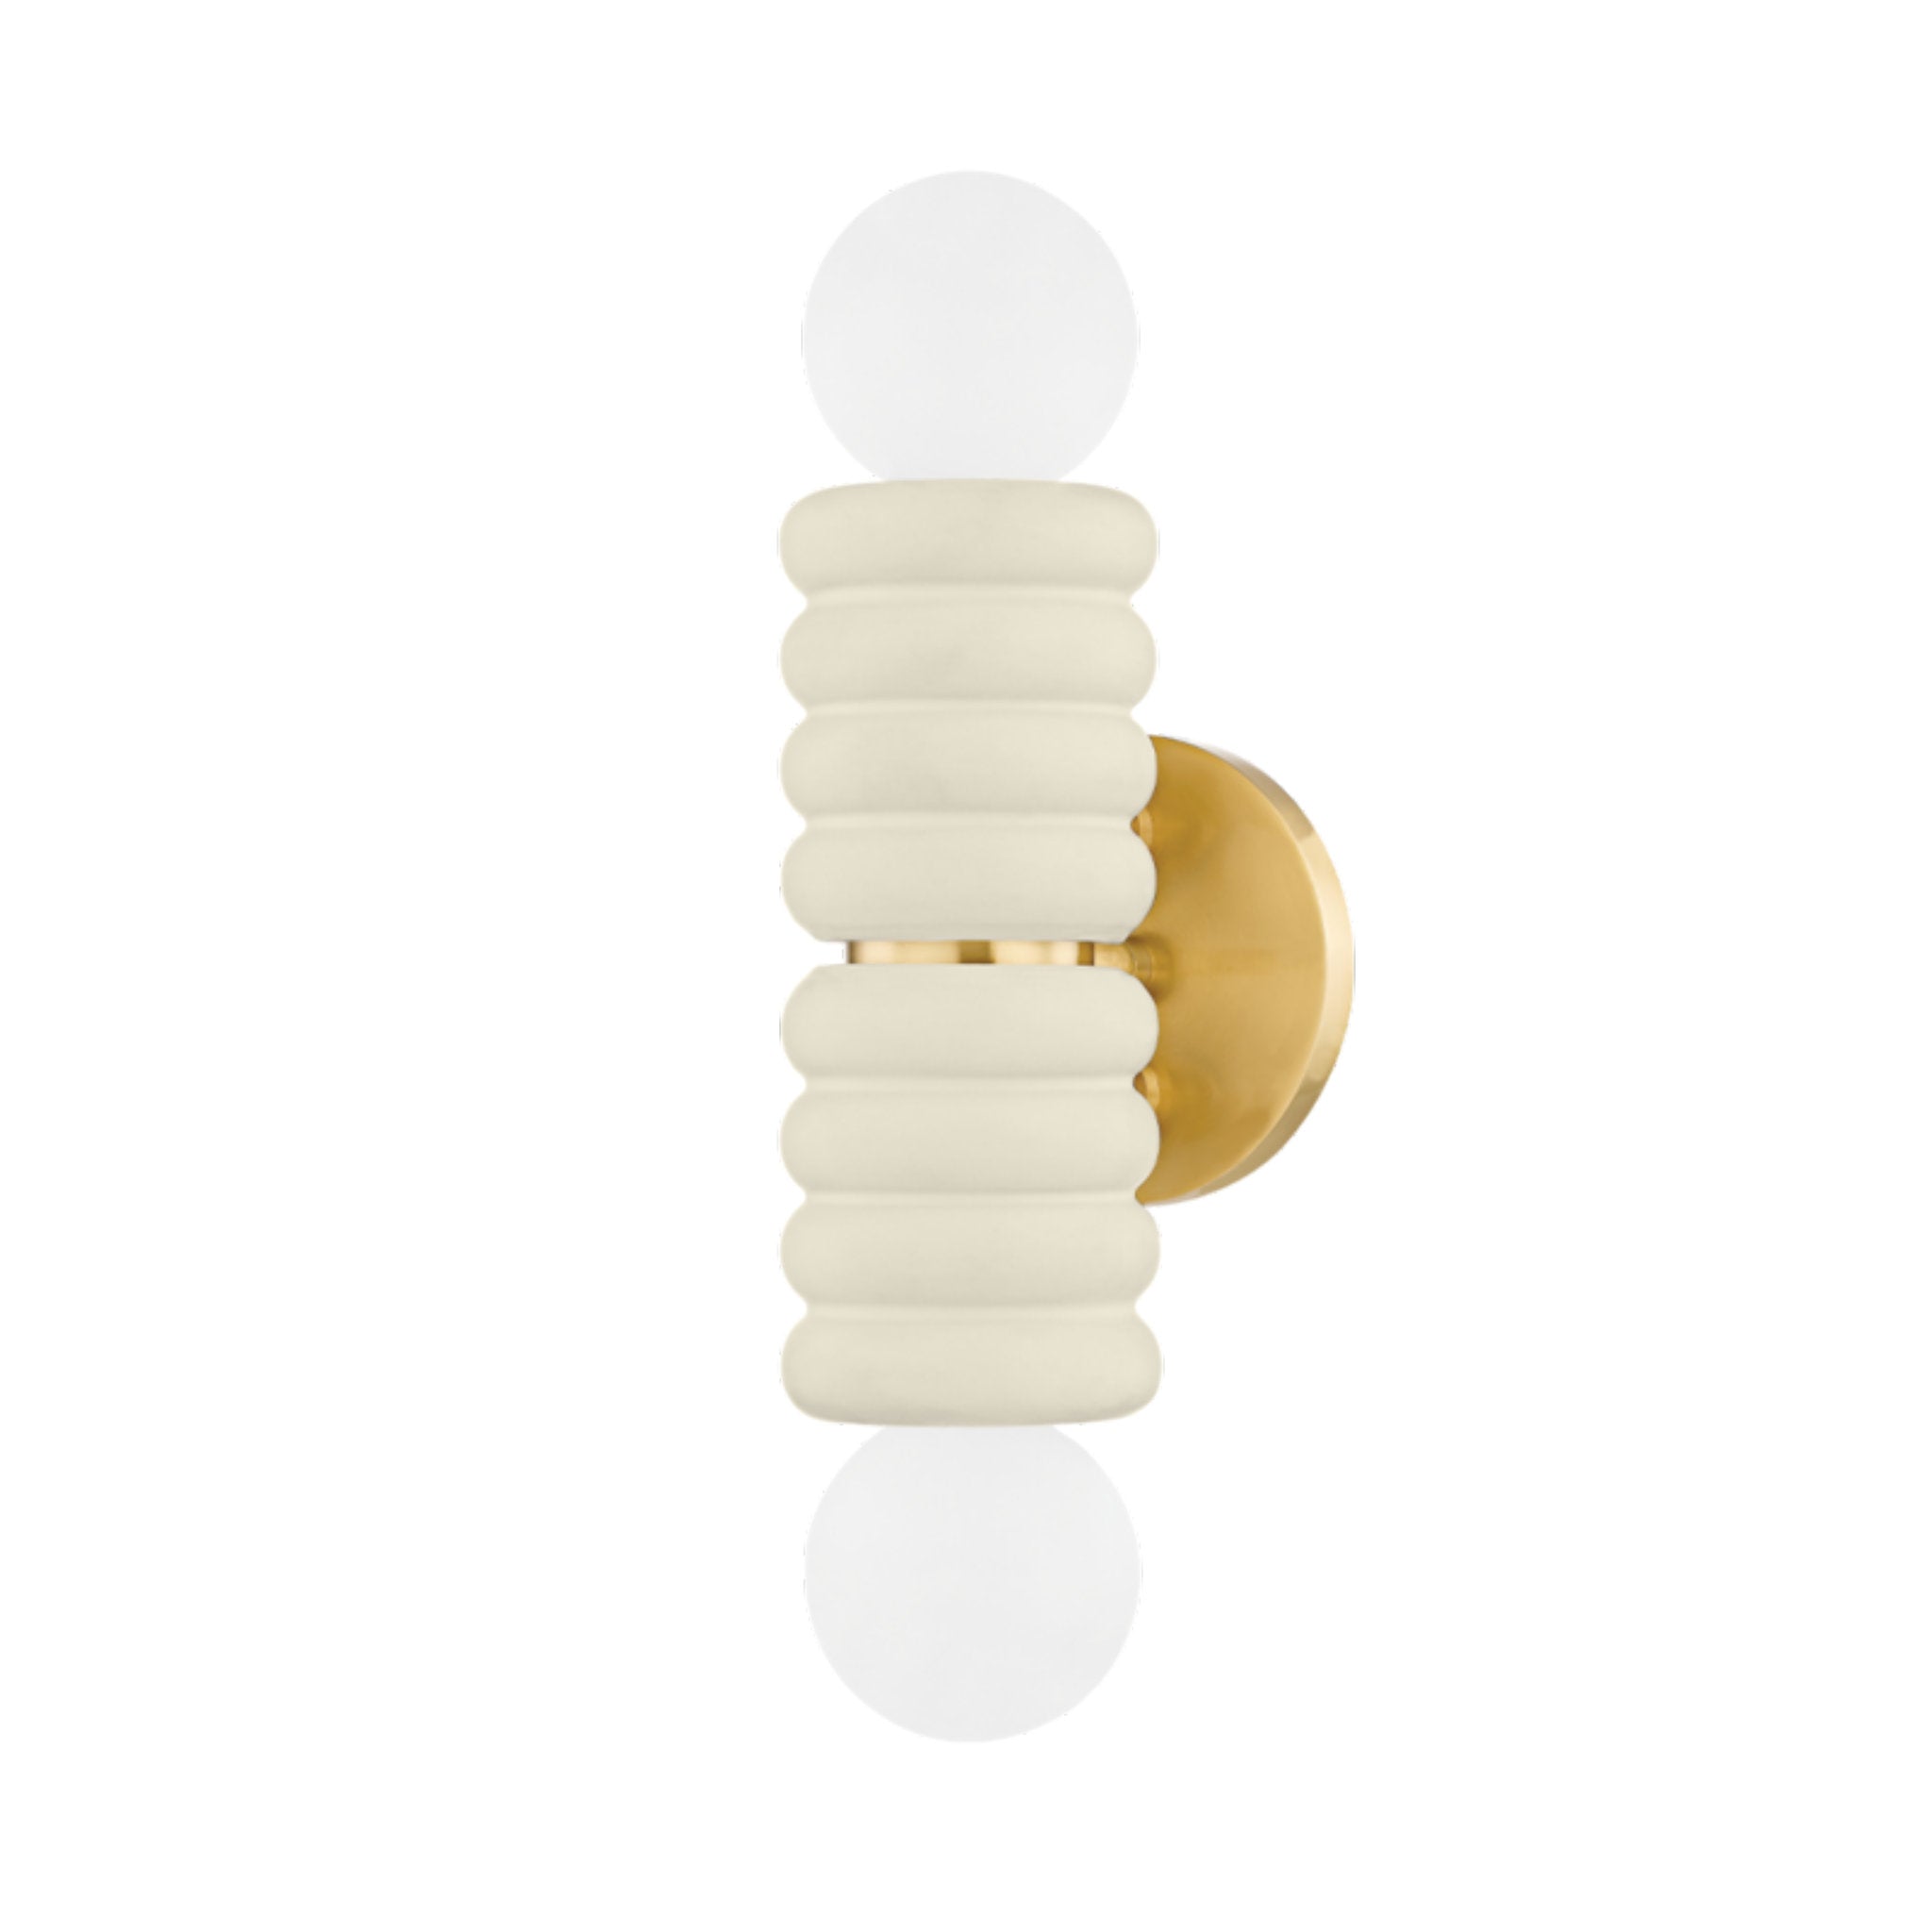 Bibi 2 Light Wall Sconce in Aged Brass/Ceramic Antique Ivory by Eny Lee Parker